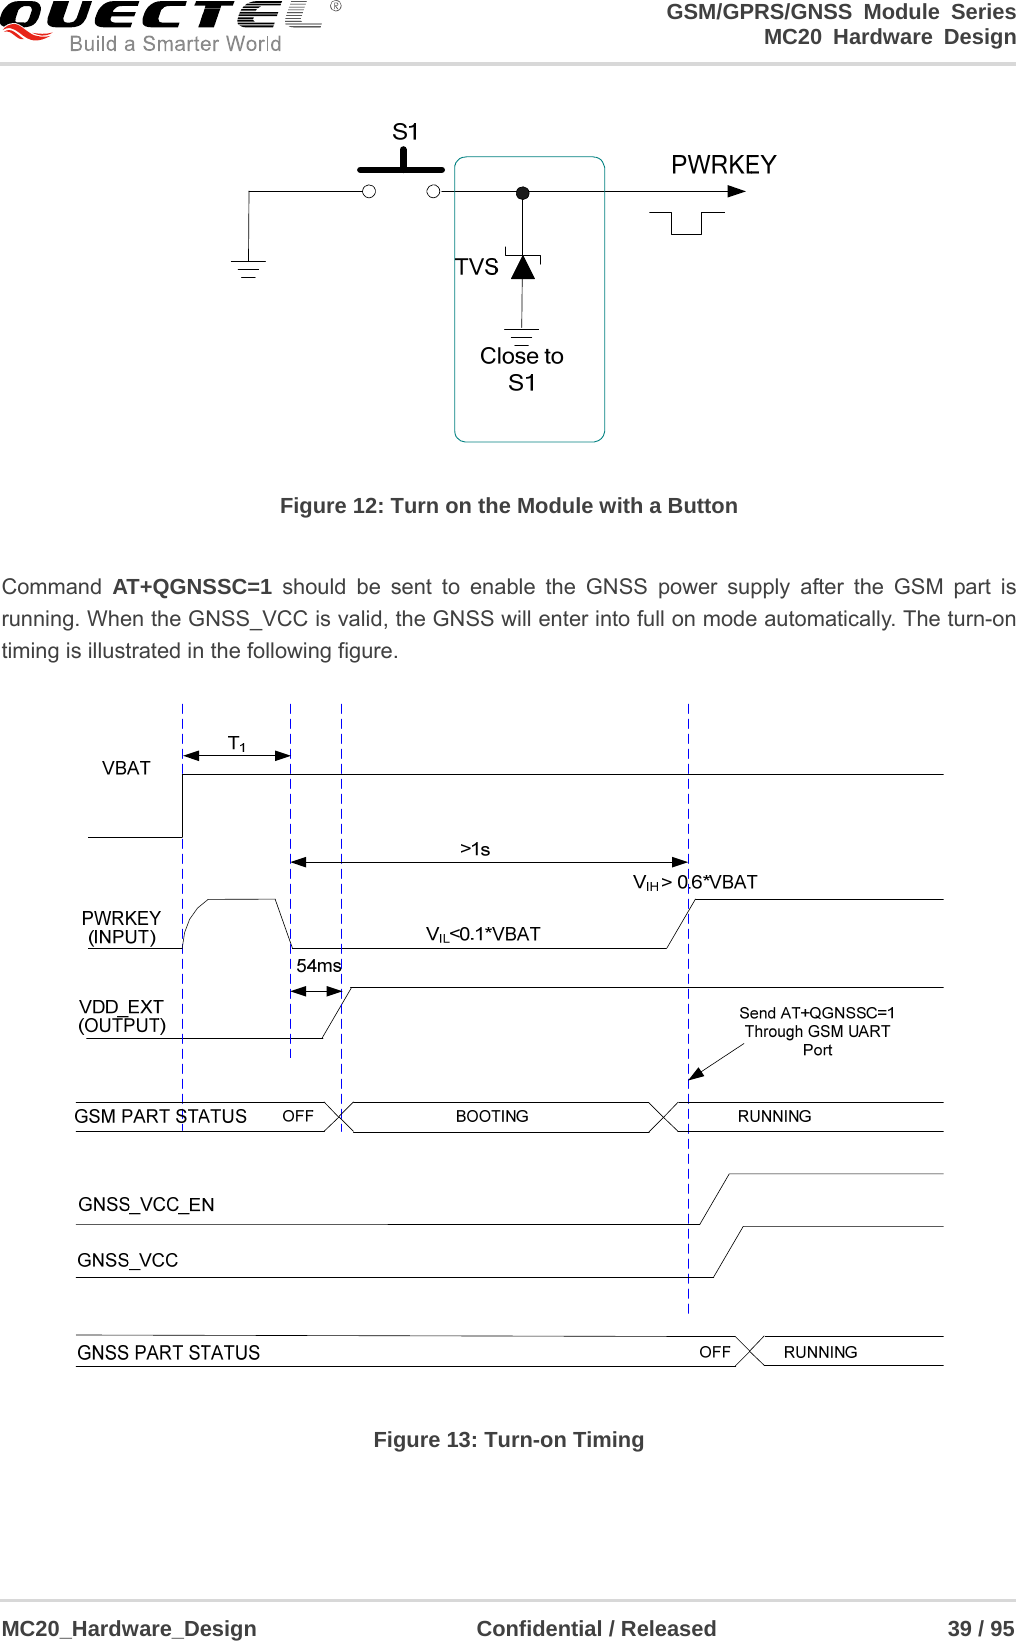                                                                     GSM/GPRS/GNSS Module Series                                                                 MC20 Hardware Design  MC20_Hardware_Design                    Confidential / Released                     39 / 95      Figure 12: Turn on the Module with a Button  Command  AT+QGNSSC=1 should be sent to enable the GNSS power supply after the GSM part is running. When the GNSS_VCC is valid, the GNSS will enter into full on mode automatically. The turn-on timing is illustrated in the following figure.   Figure 13: Turn-on Timing   